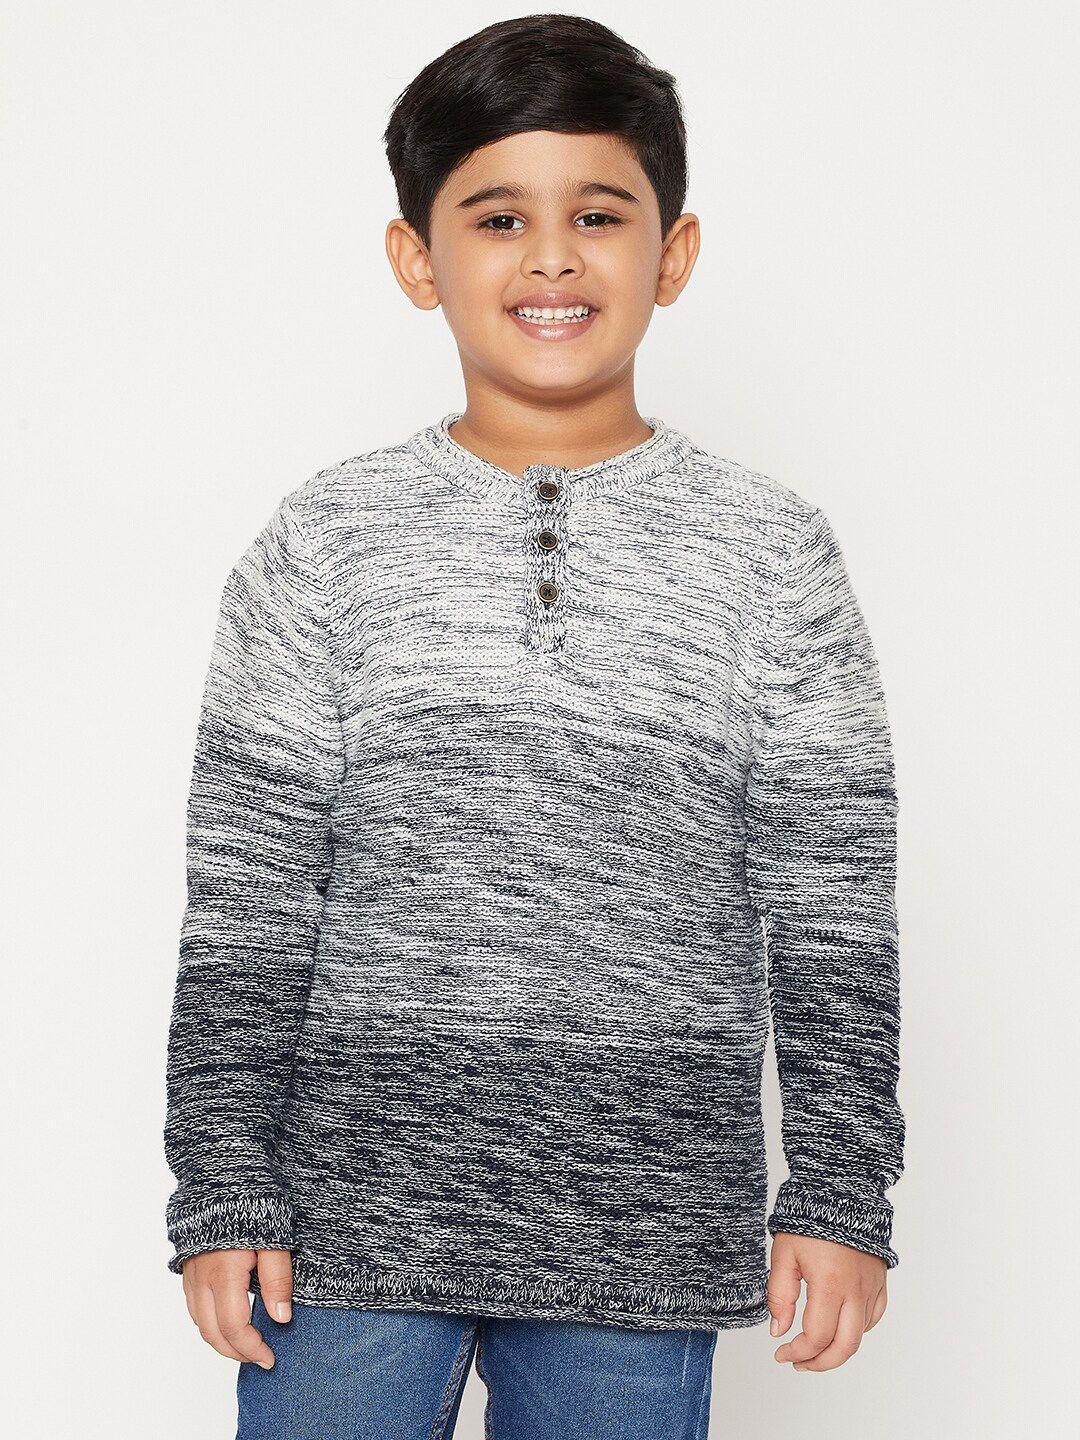 jwaaq-boys-white-&-grey-ombre-pullover